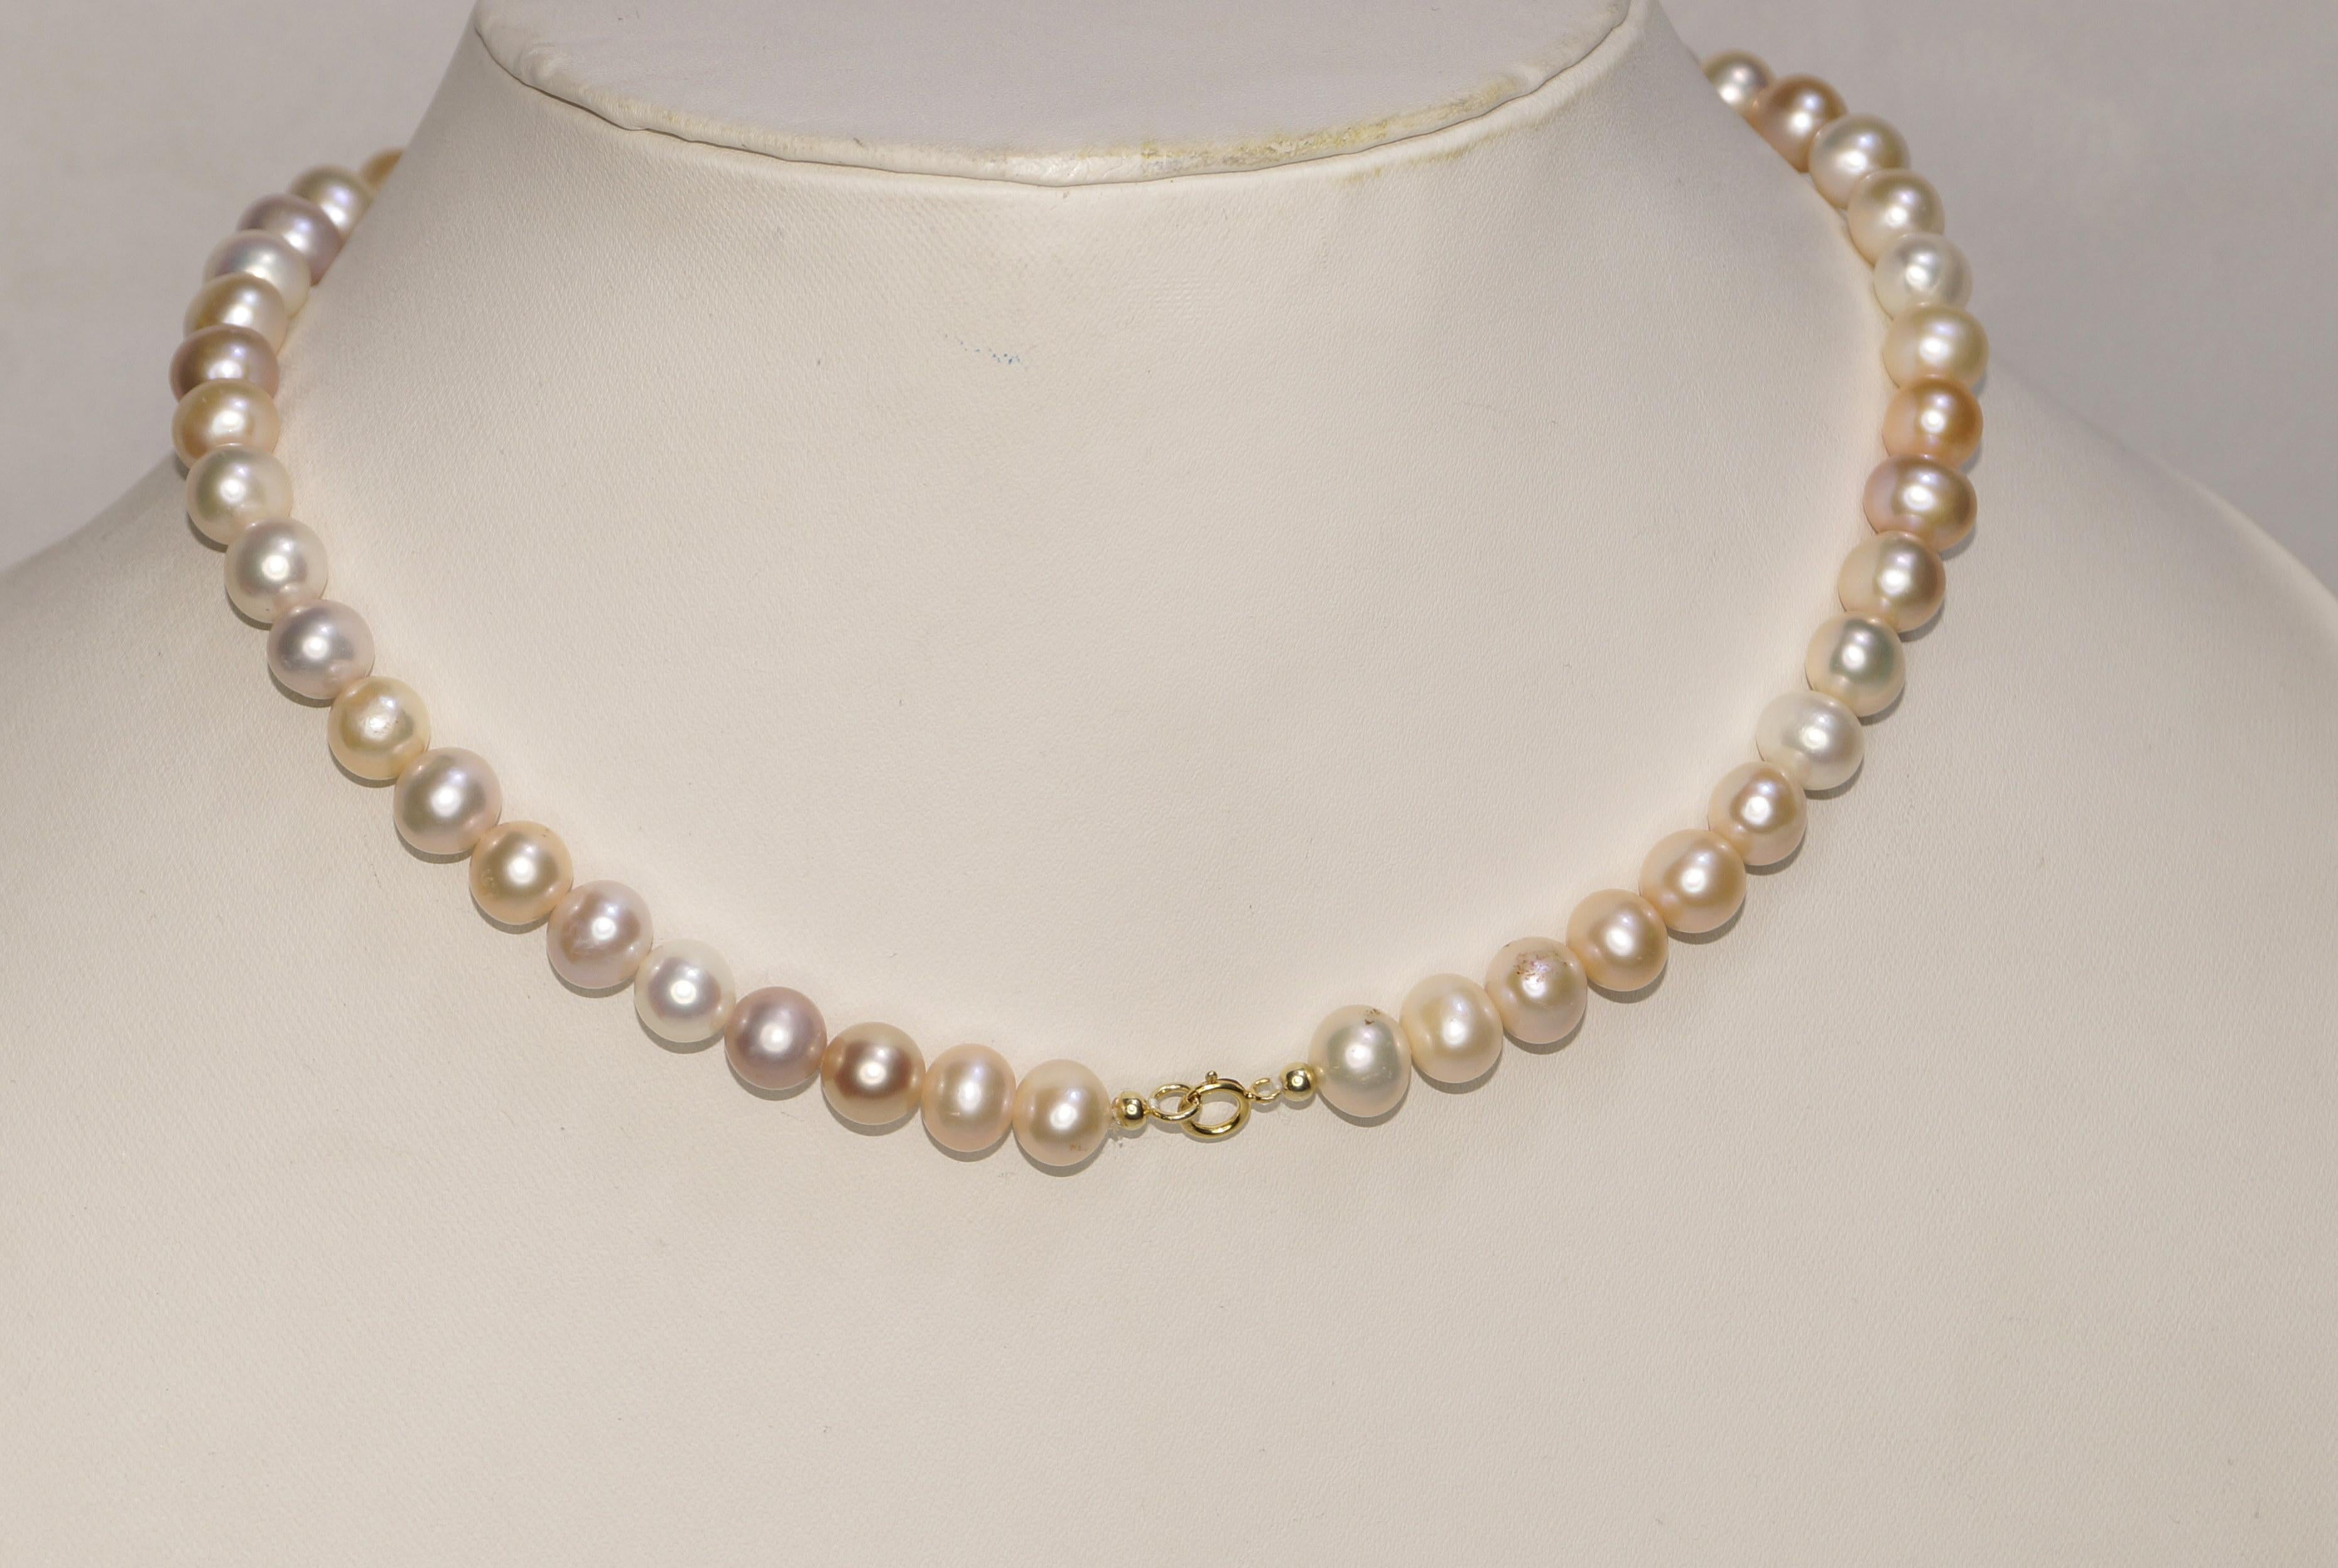 14k Gold Golden Cream mix Pearl necklace 14mm Freshwater Round Pearl necklace 2